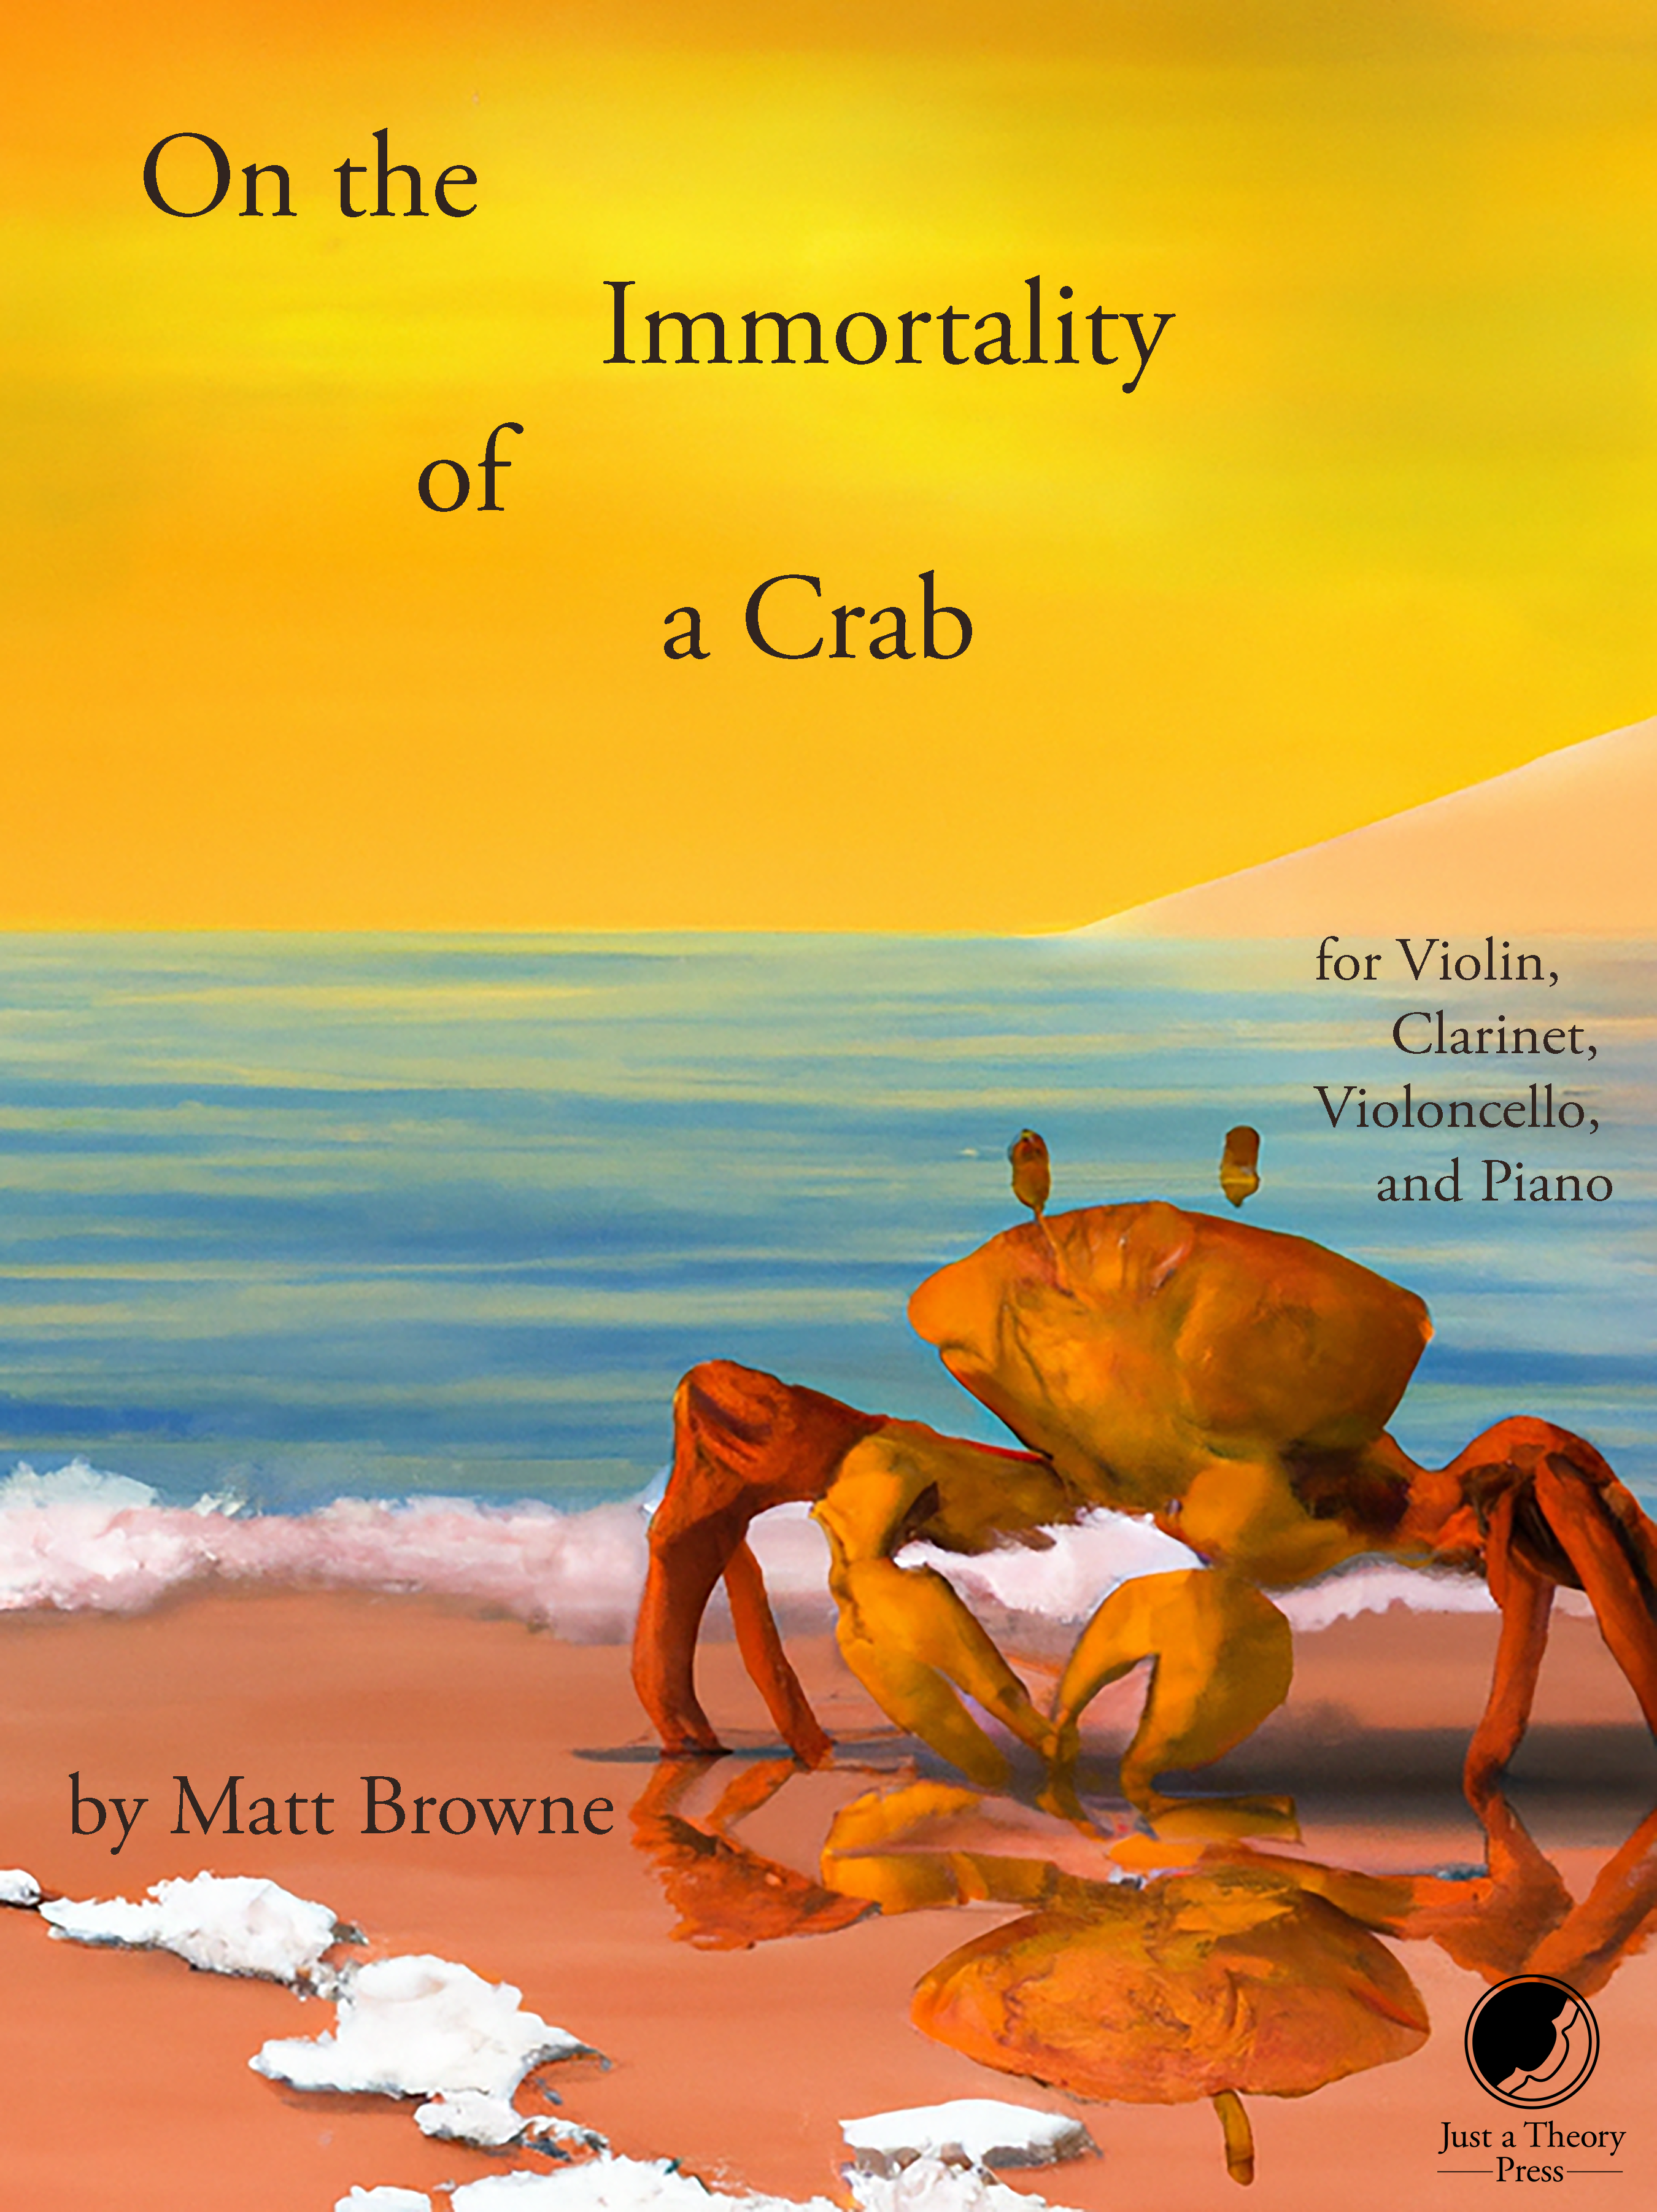 On the Immortality of a Crab